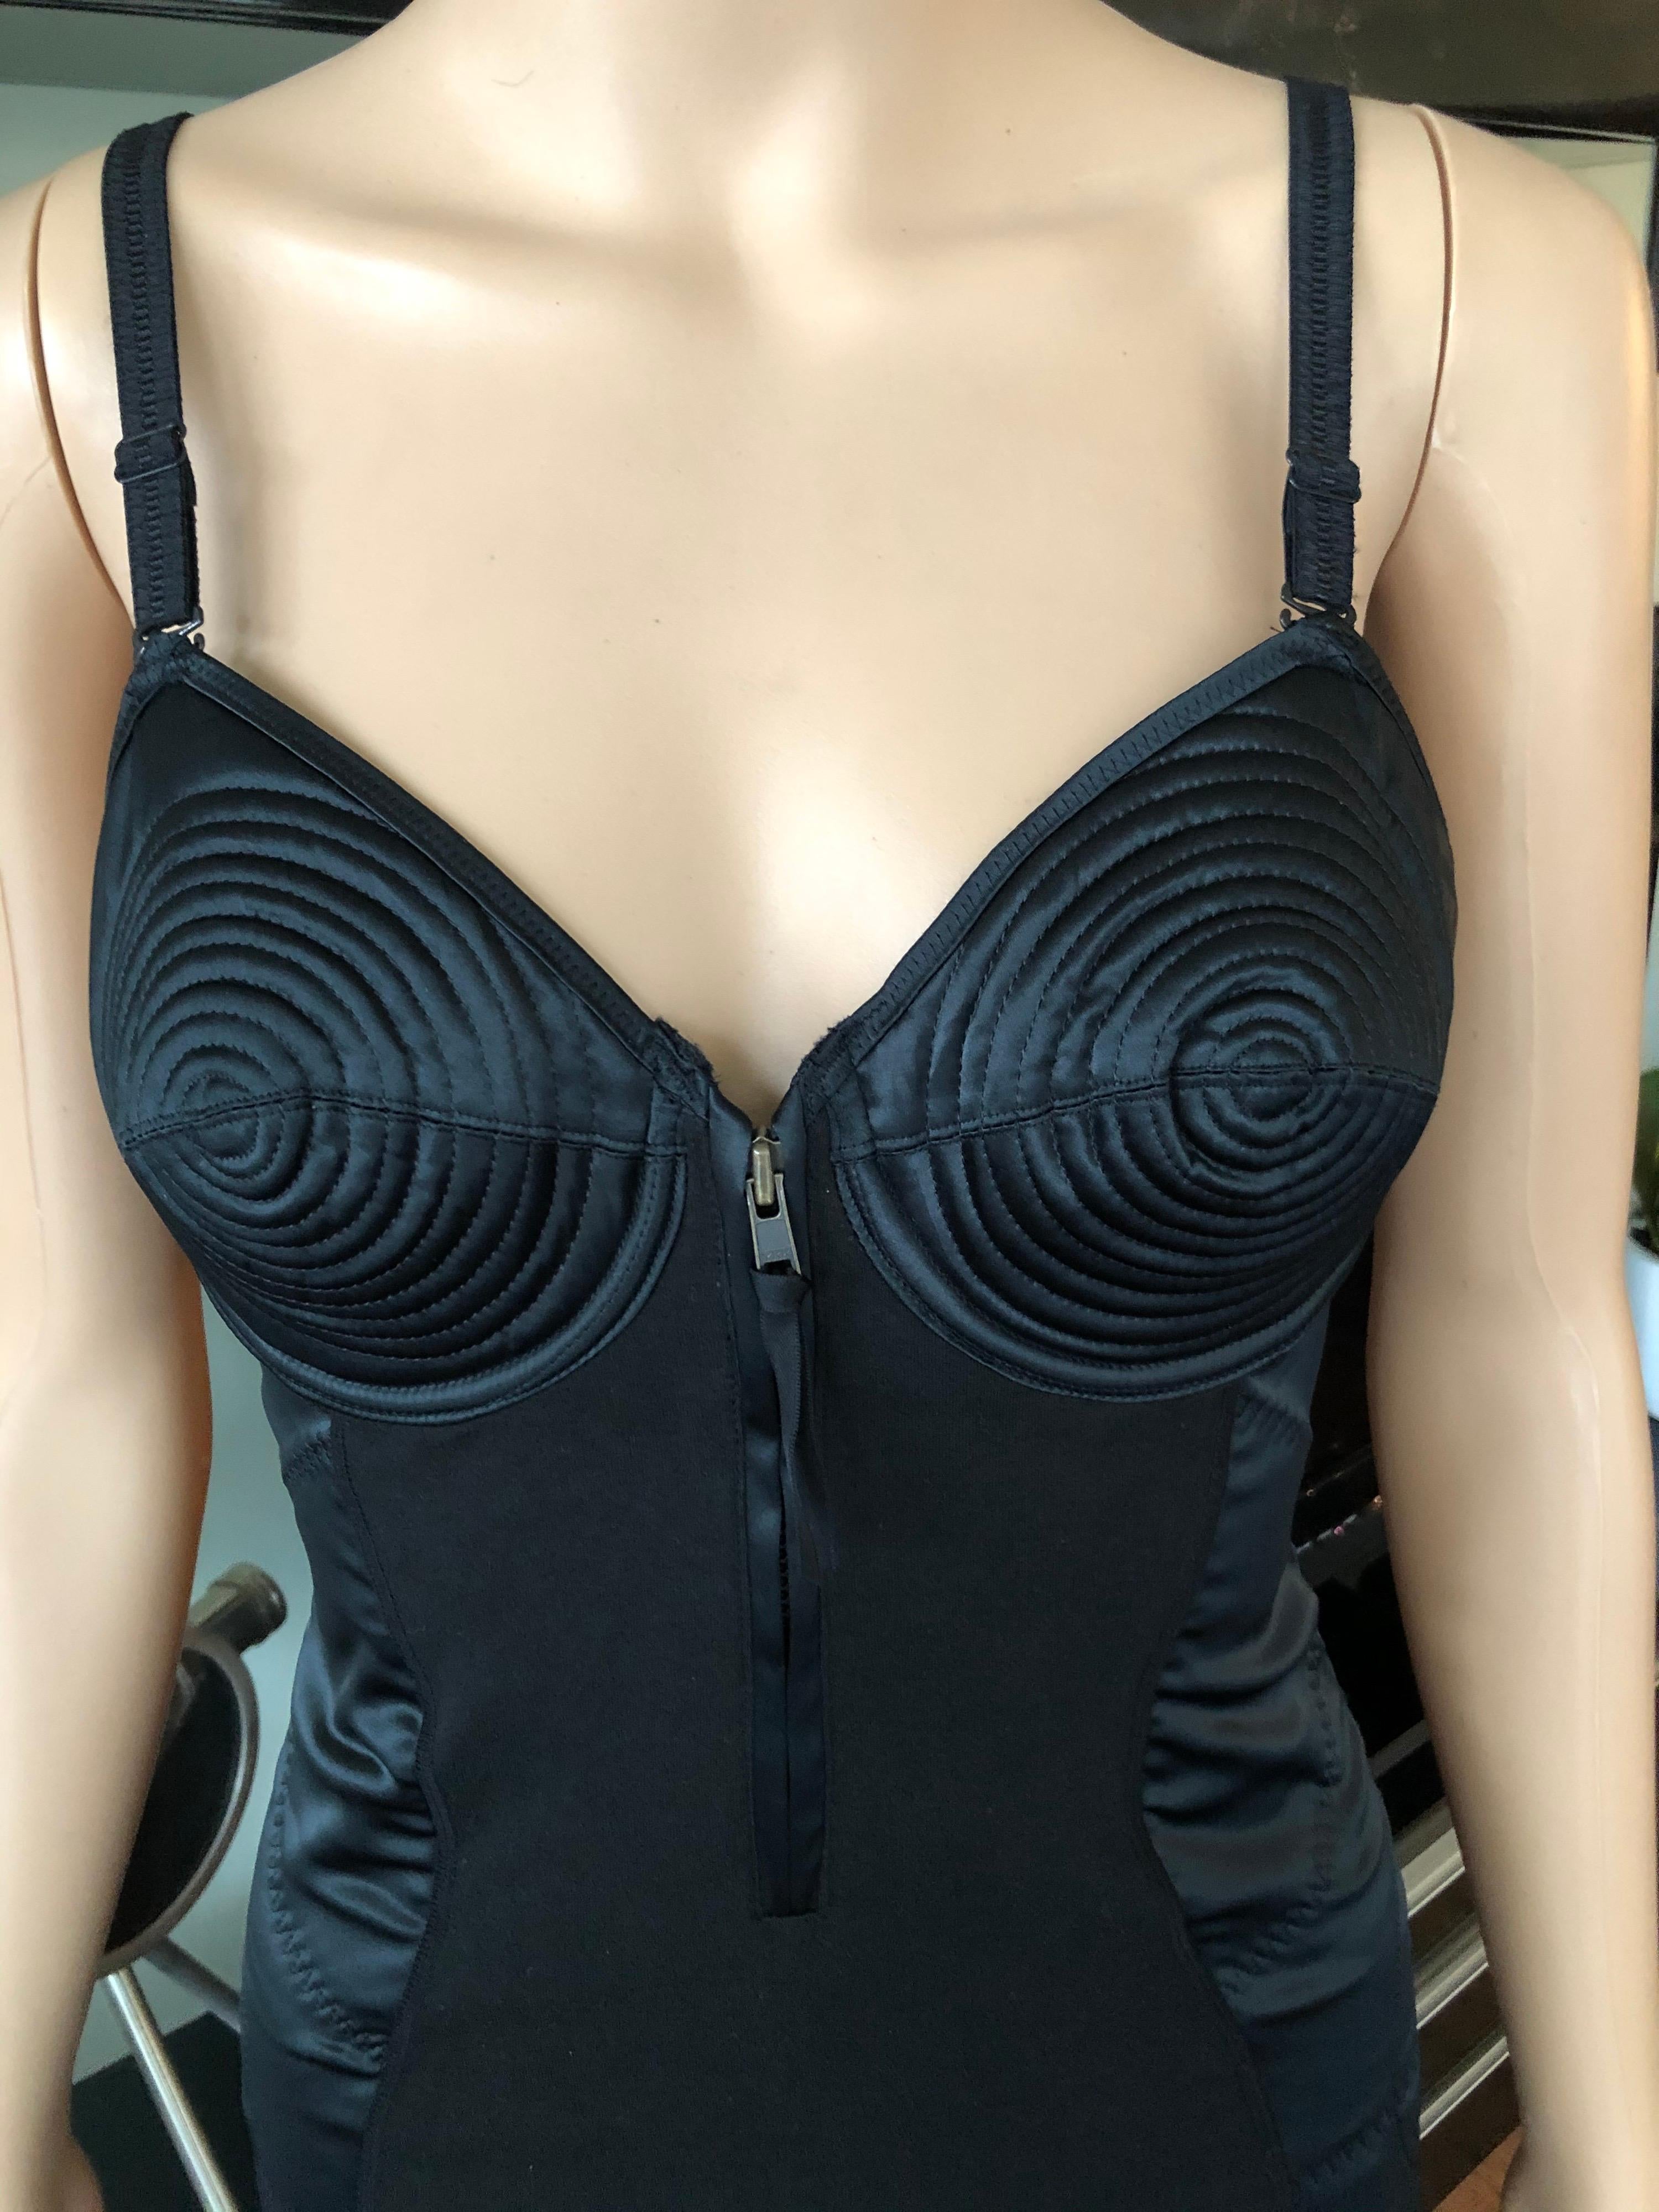 Jean Paul Gaultier 1990's Vintage Cone Bra Corset Bondage Black Mini Dress XS/S

Please note size and fabric tags are missing. Please find the approximate measurements below:
Chest: 28-33